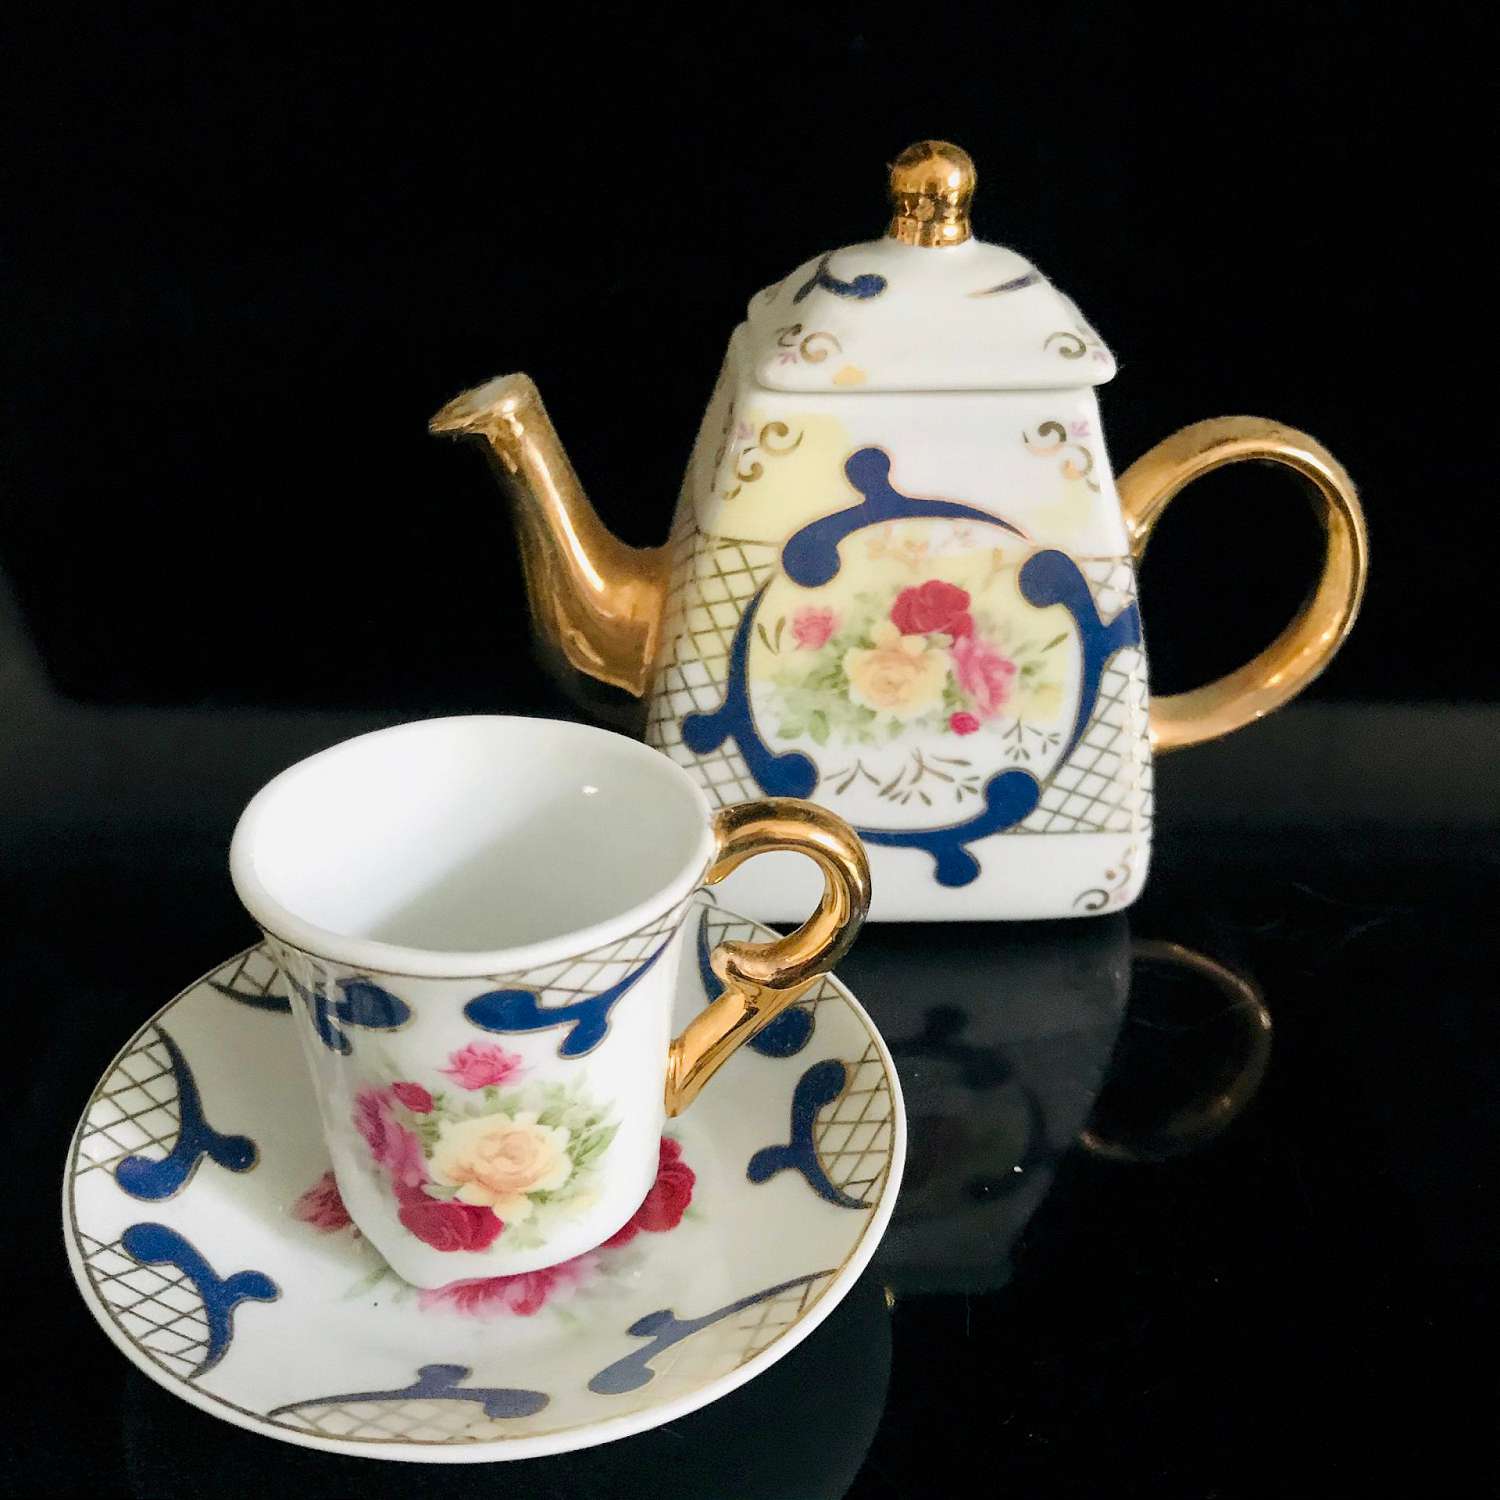 https://www.truevintageantiques.com/wp-content/uploads/2019/12/vintage-miniature-tea-set-imperial-china-blue-gold-trim-with-yellow-pink-dark-pink-roses-heavy-gold-collectible-display-farmhouse-cottage-5df06aea2-scaled.jpg